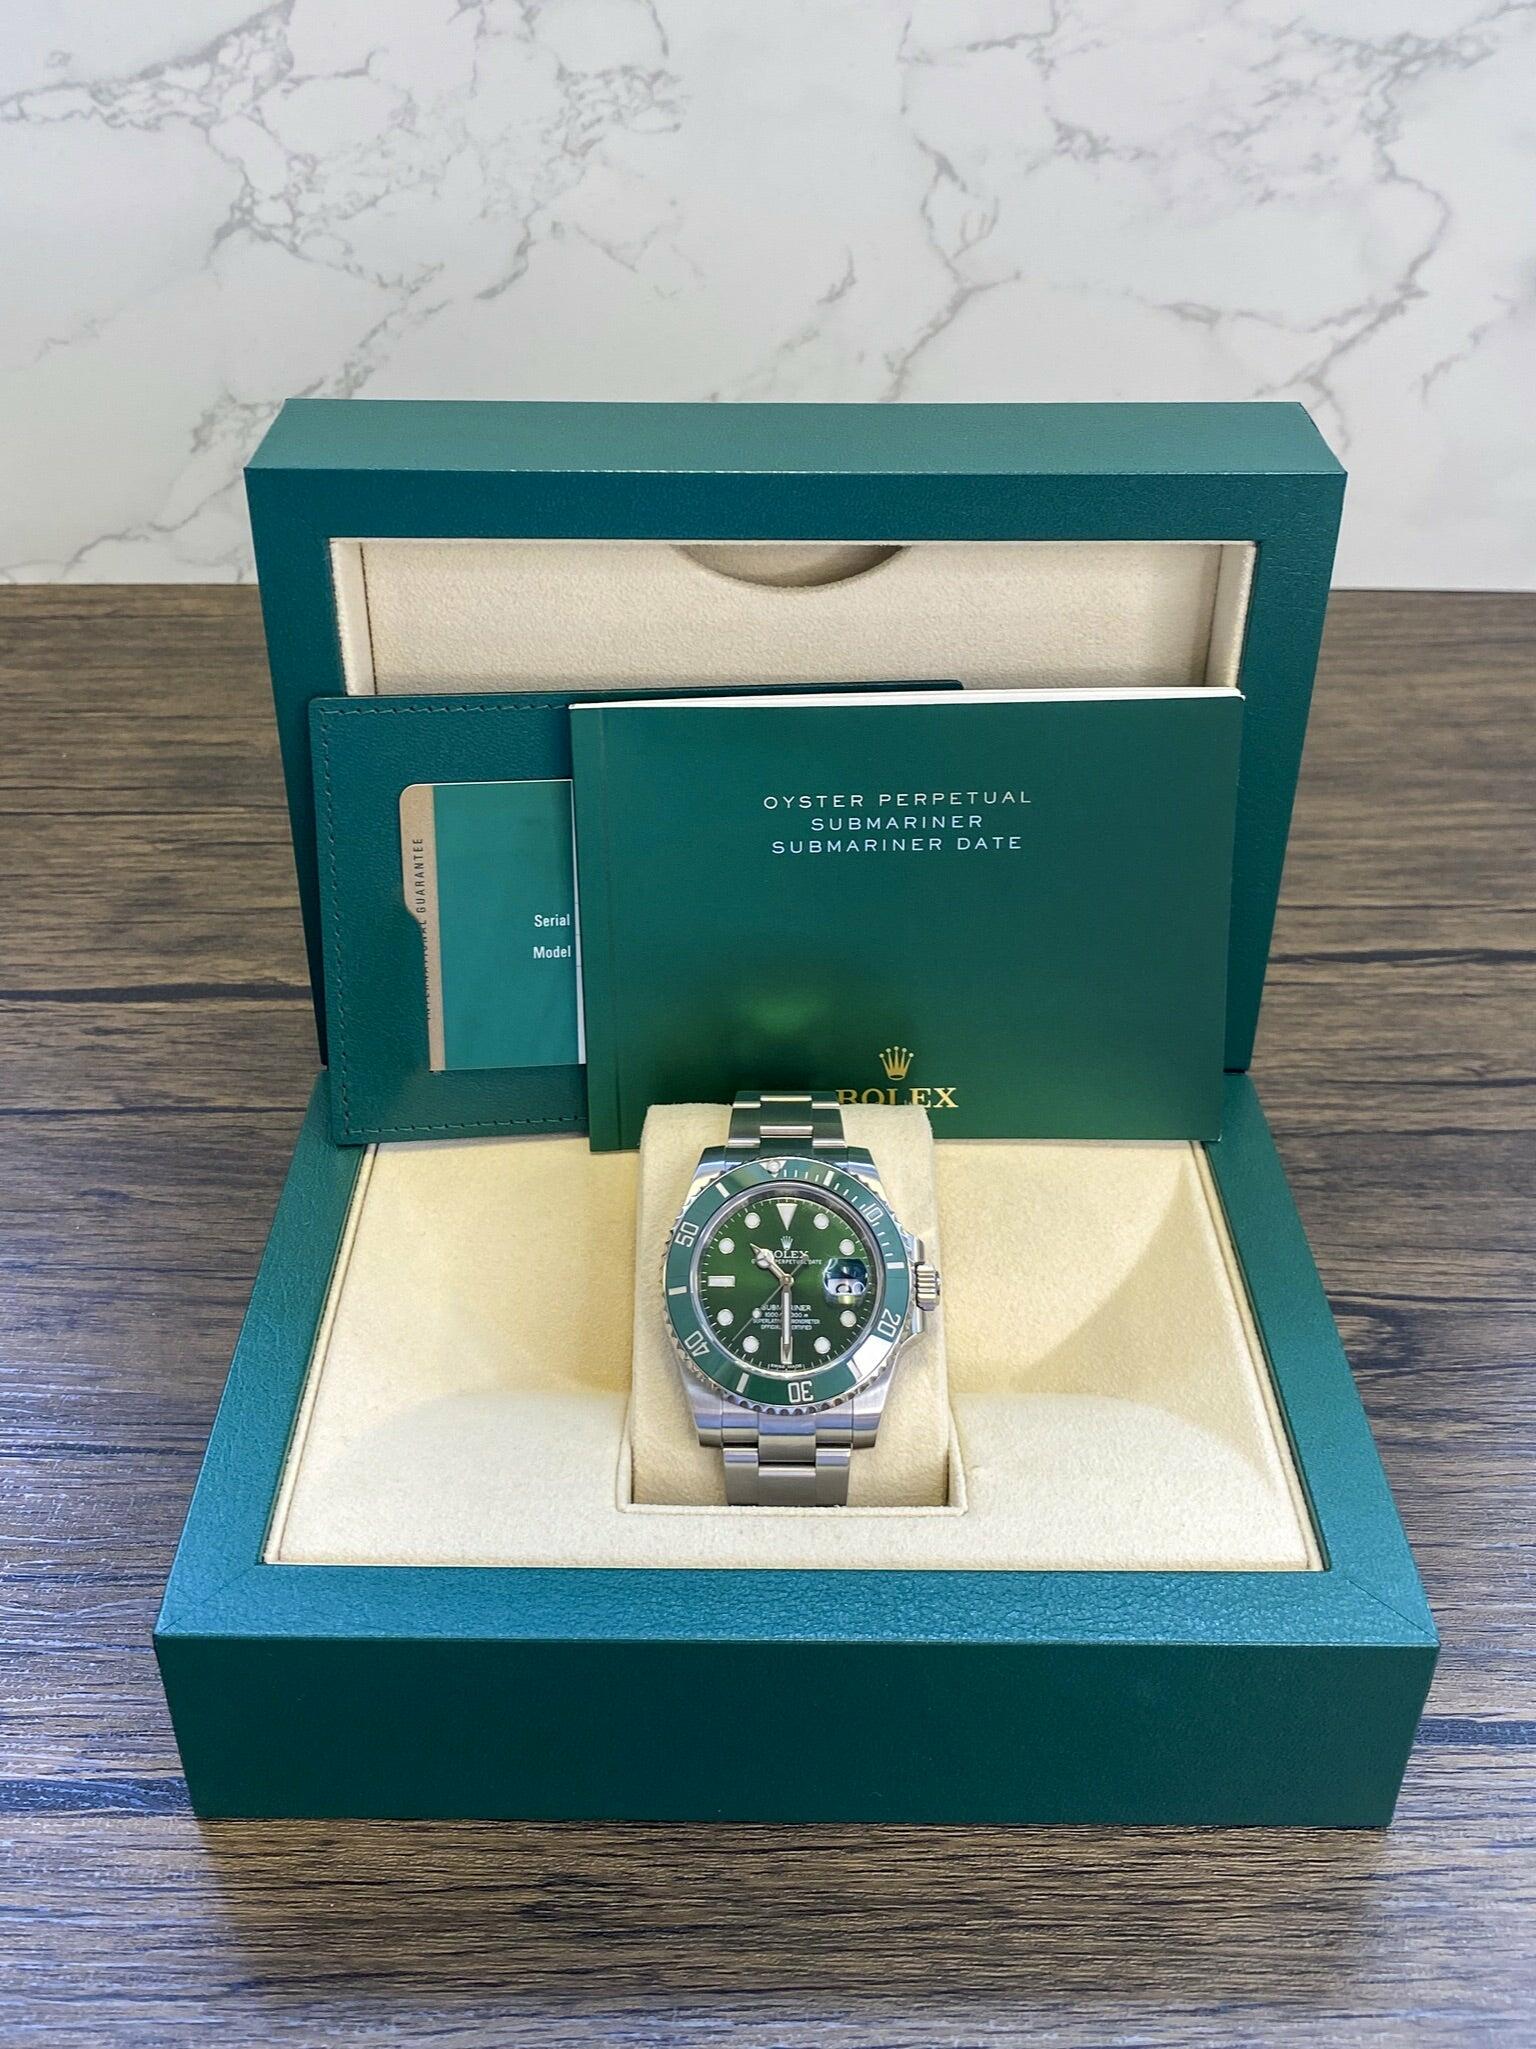 Rolex Submariner Hulk Box And Papers - Green Dial - 2020 116610LV 2020 »  Watches catalog